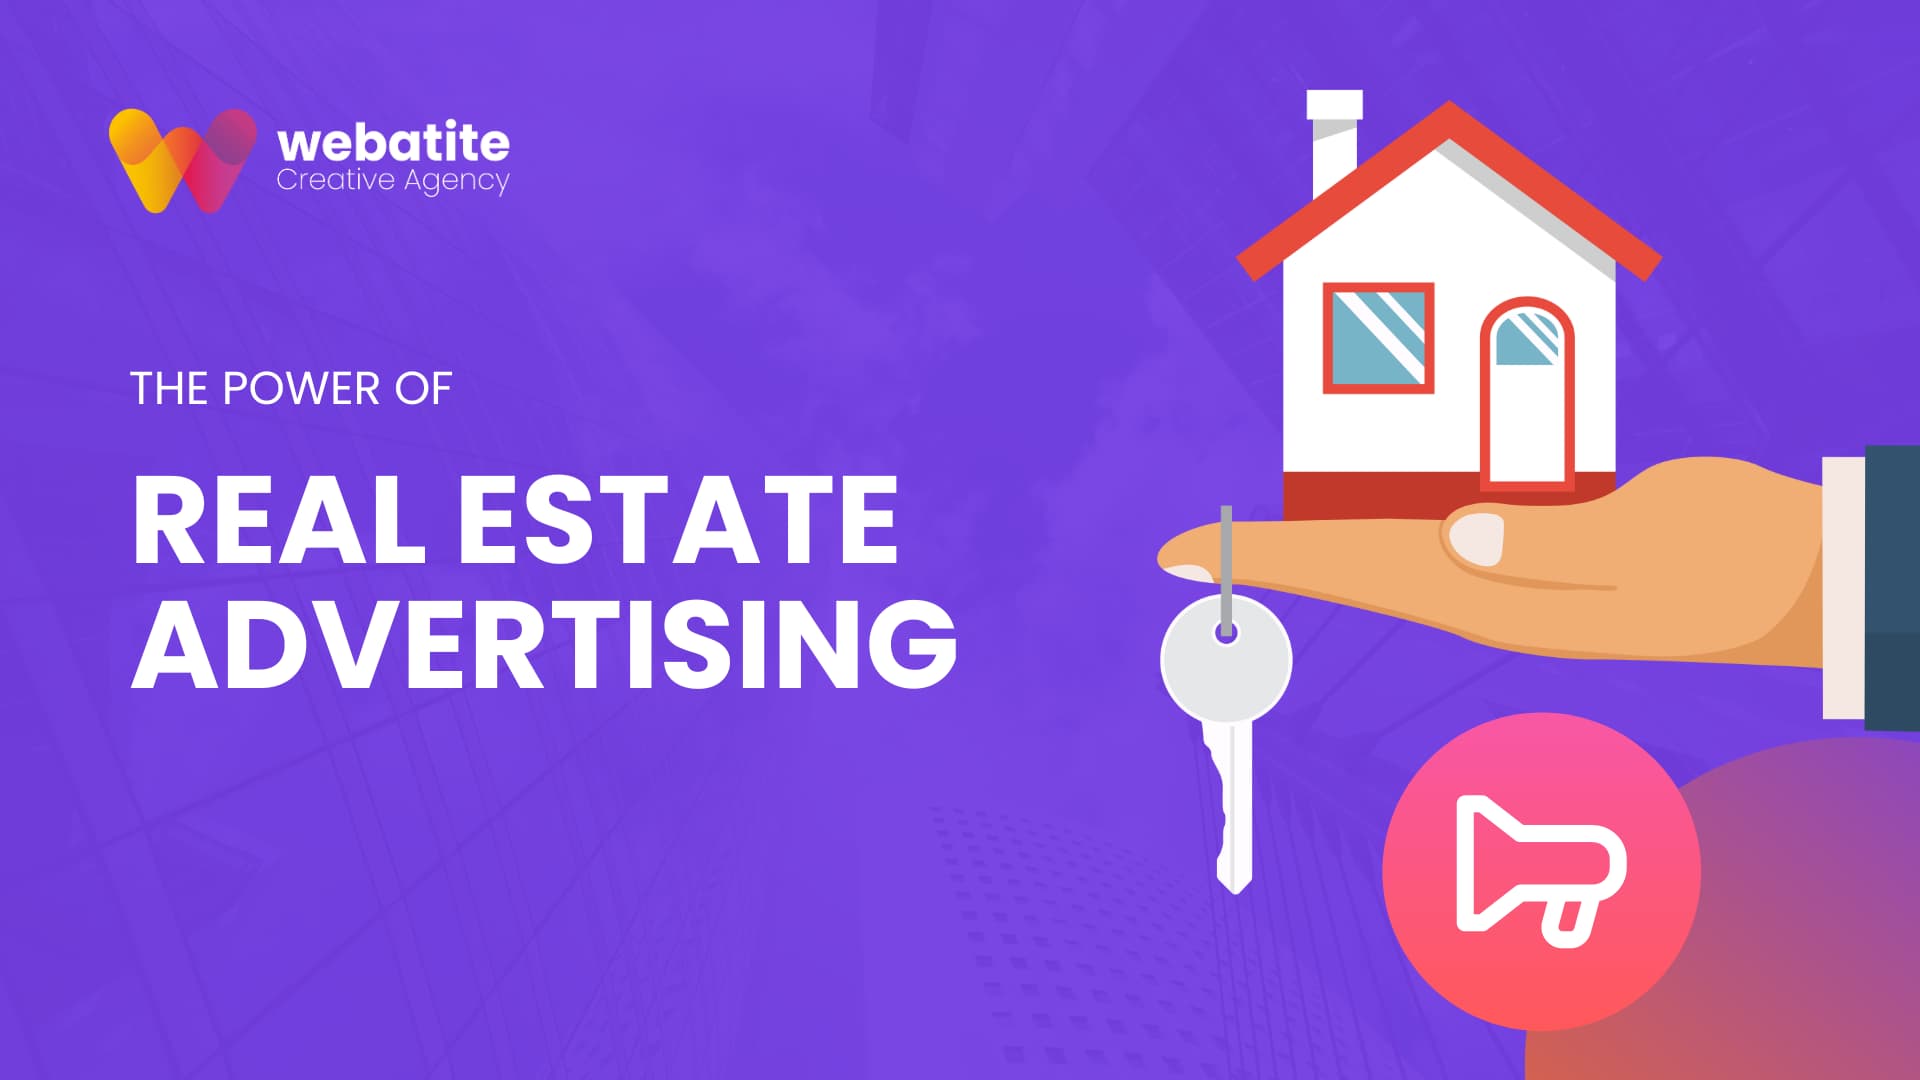 The Power of Real Estate Advertising